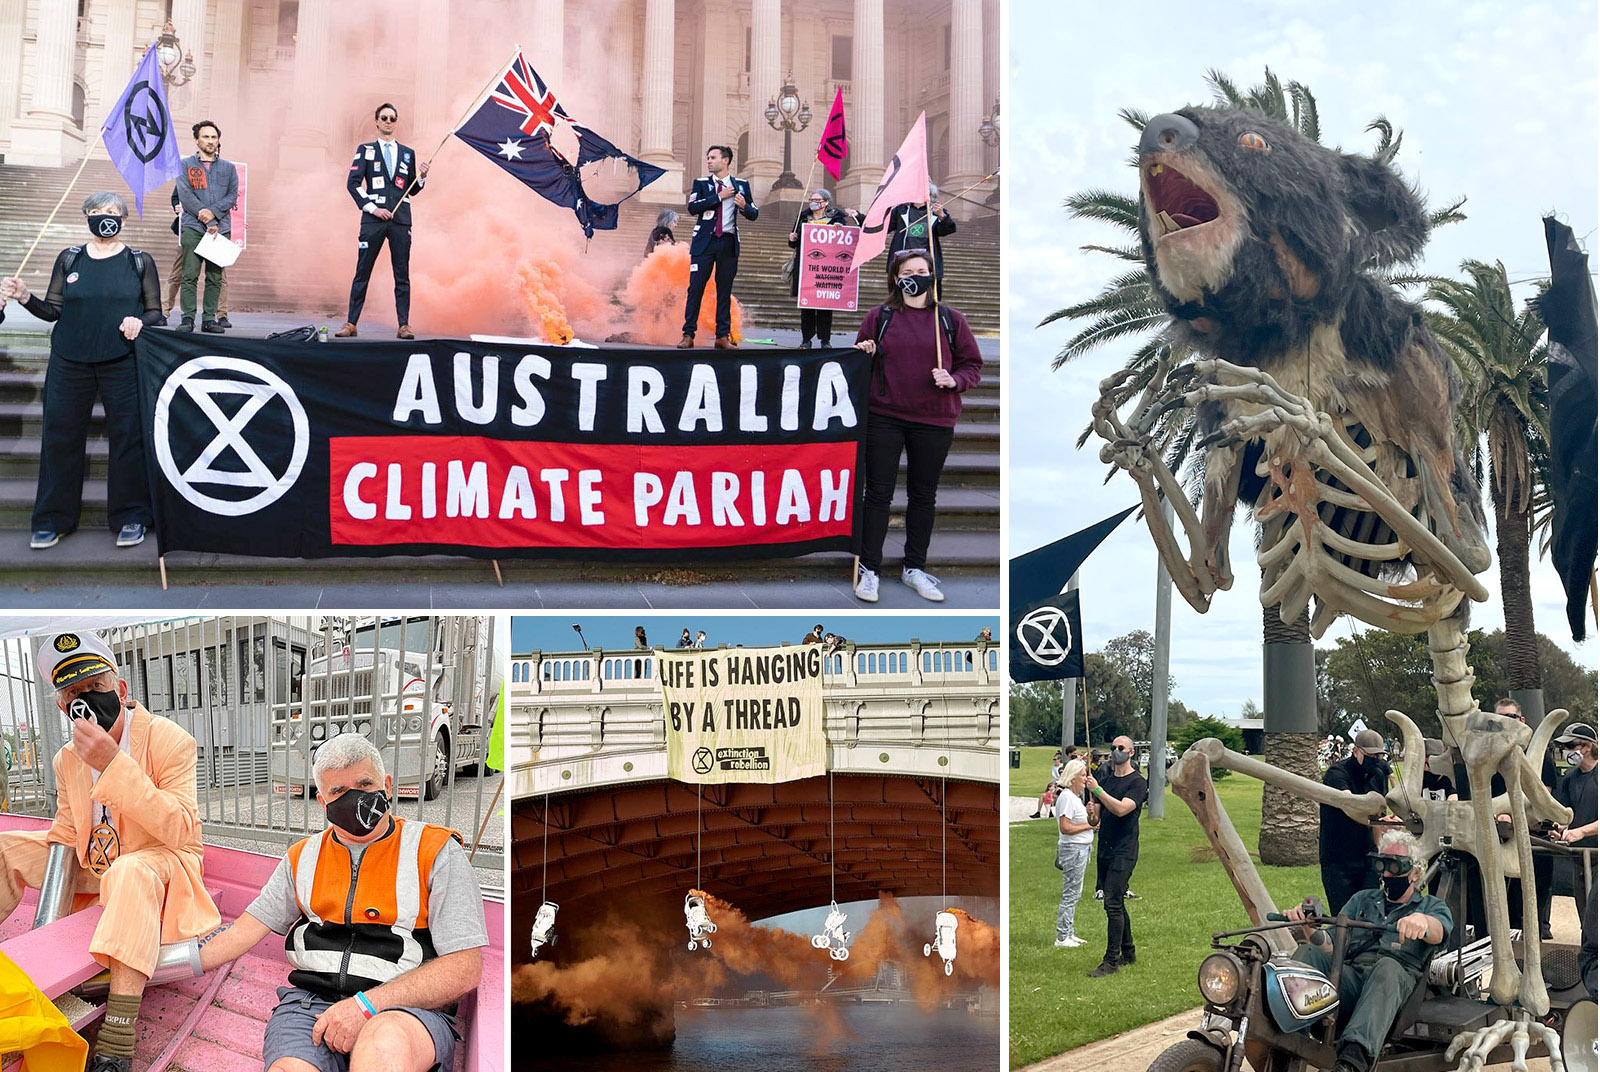 Rebels hold flags and let off smoke outside parliament, 2 older rebels sit in a pink boat outside Exxon, prams hang from the bridge and let off smoke, Blinky the koala is huge, half skeleton, and attached to a small vehicle driven by a rebel.